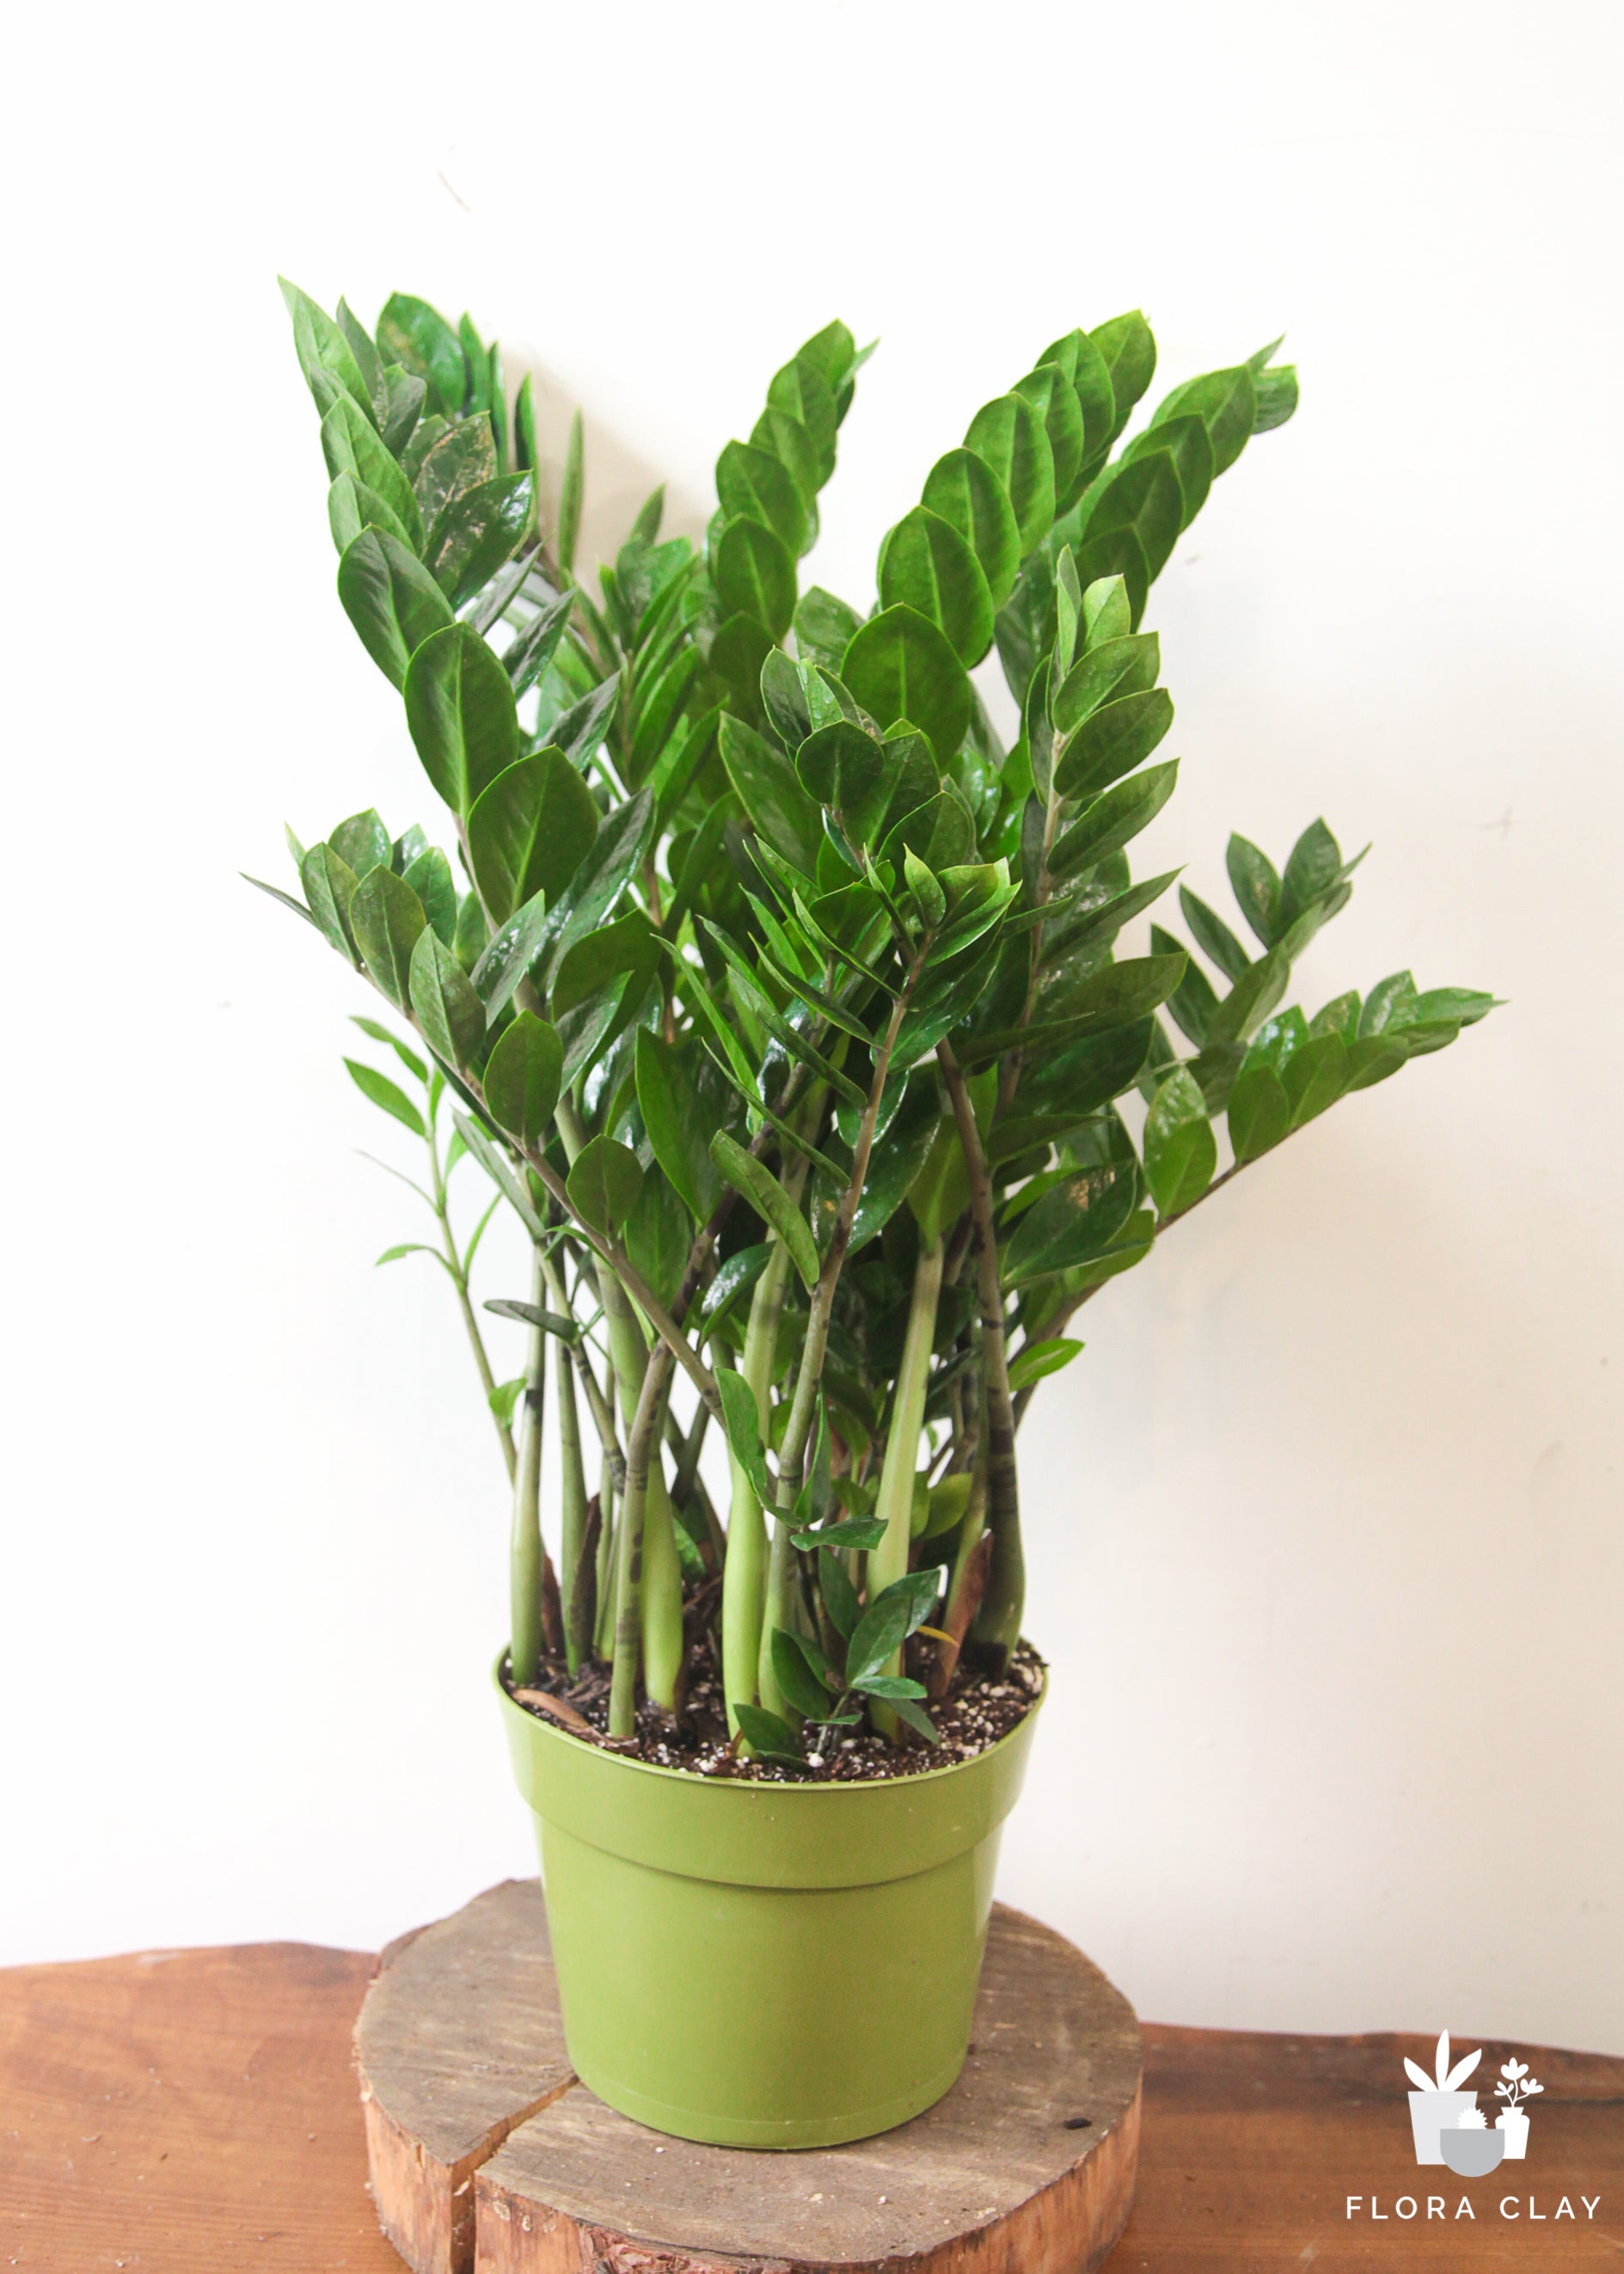 ZZ Plant Potted In Elegant Rondo Red Planter